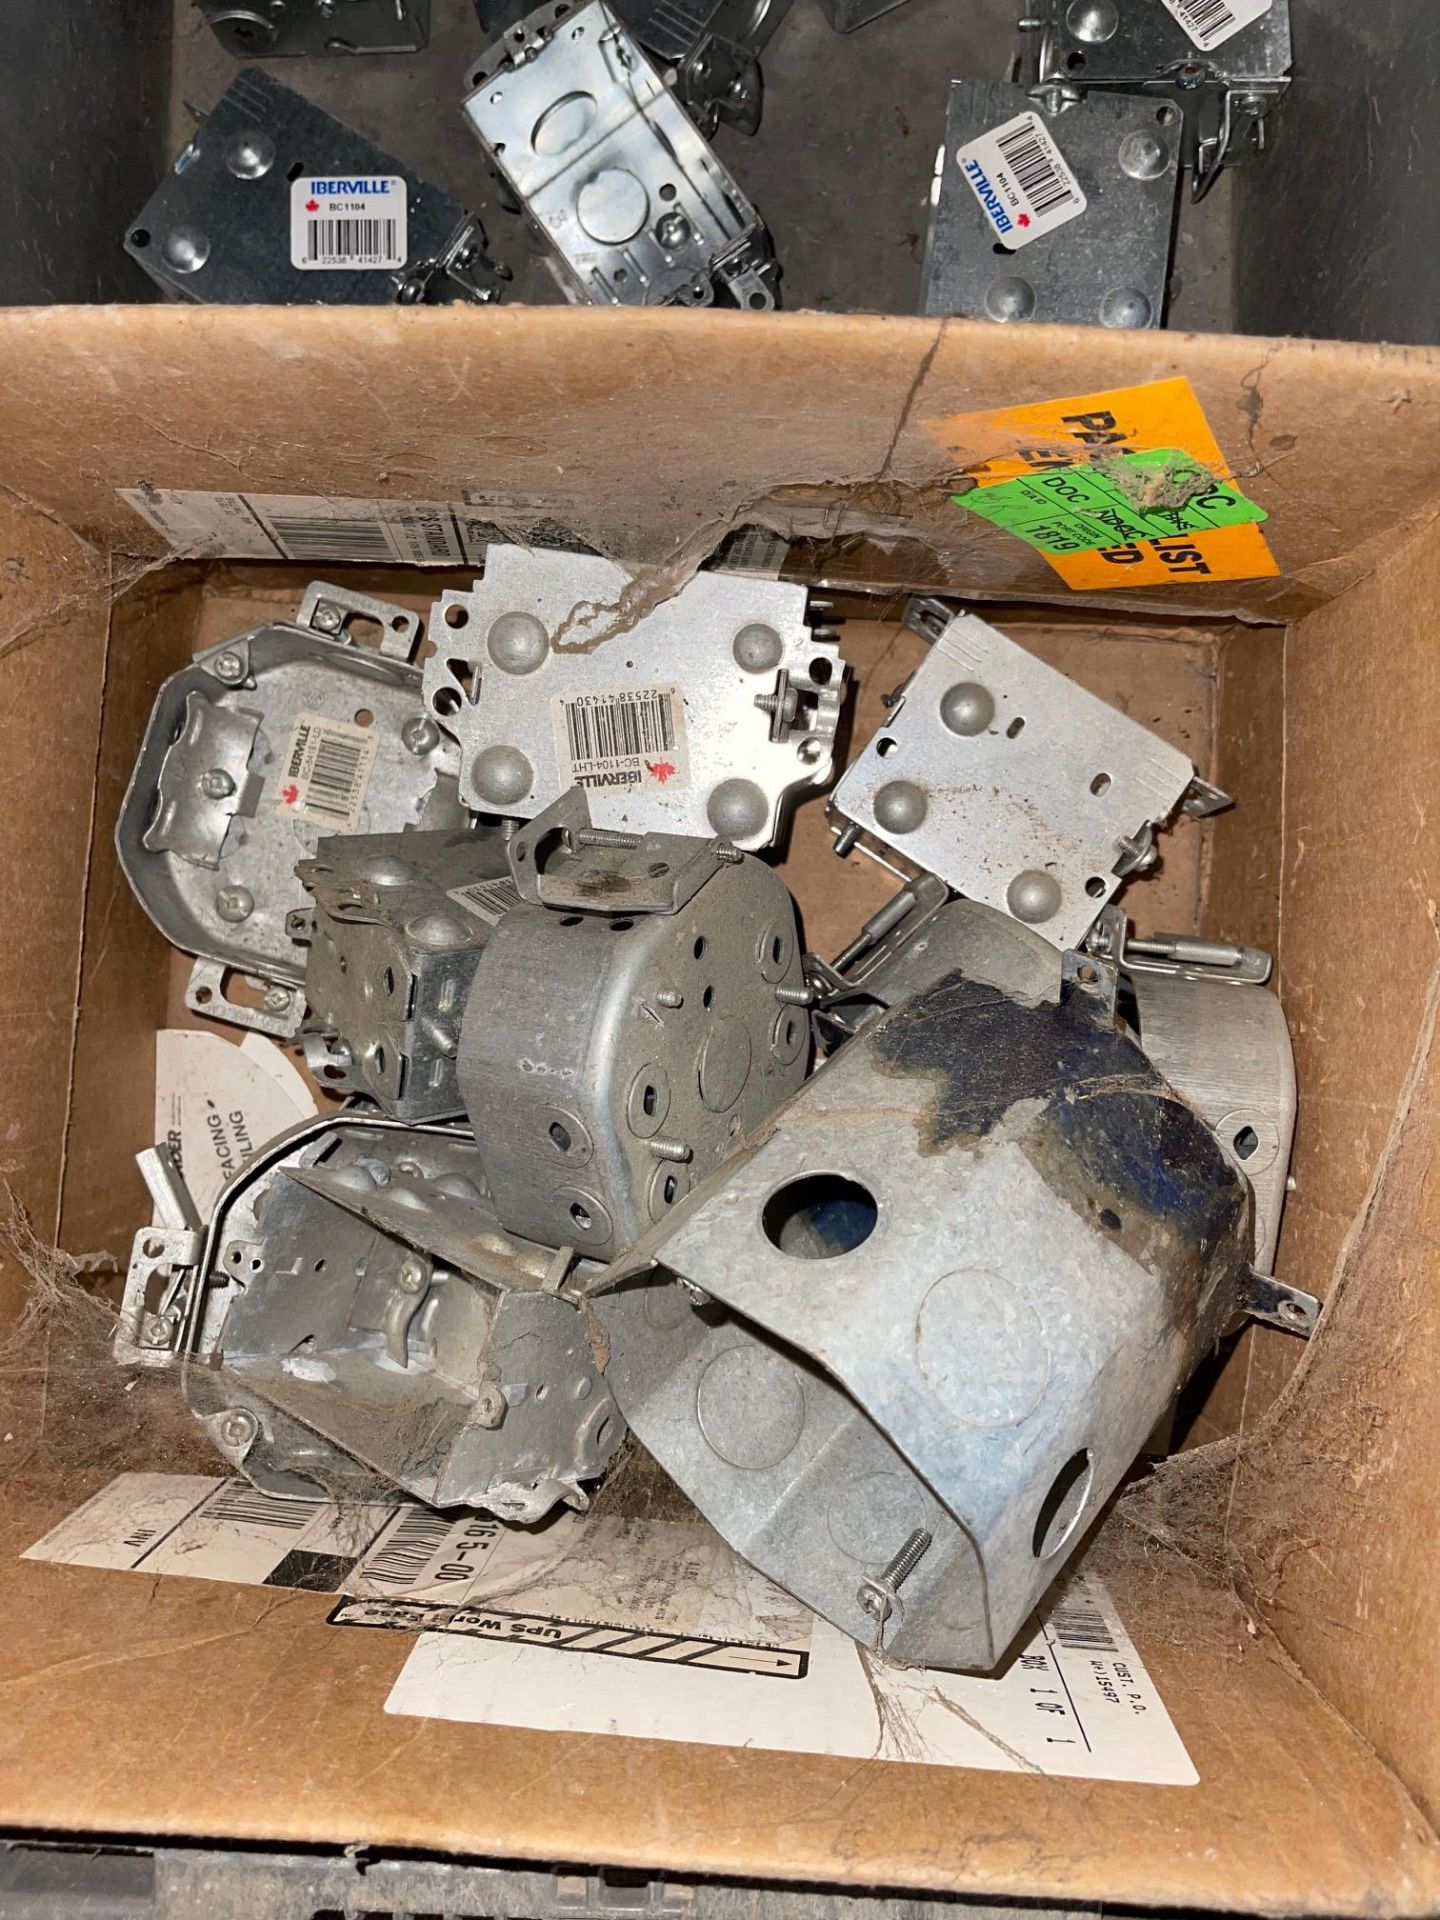 LOT OF ELECTRICAL BOXES, LIDS GALVANIZED, ALUMINUM, 3 BOXES, APPROXIMATELY 100 PIECES, RIGGING - Image 2 of 4